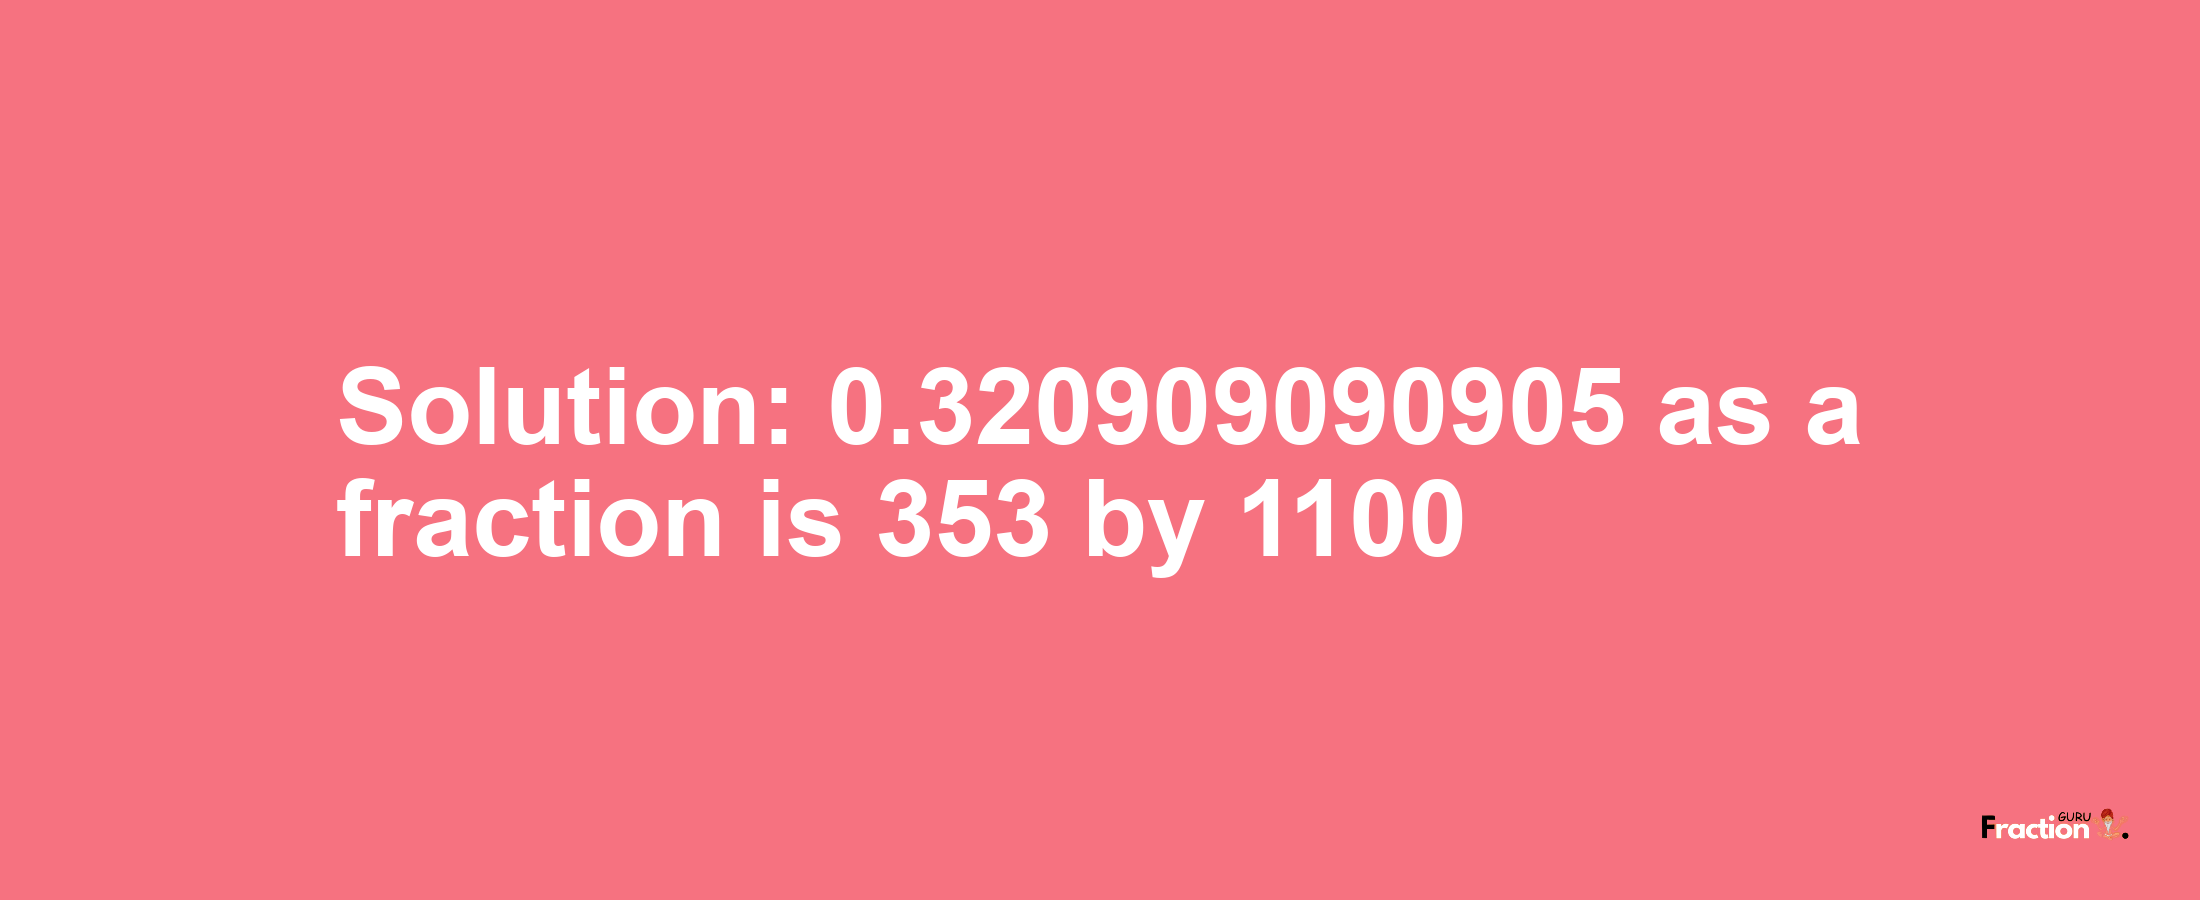 Solution:0.320909090905 as a fraction is 353/1100